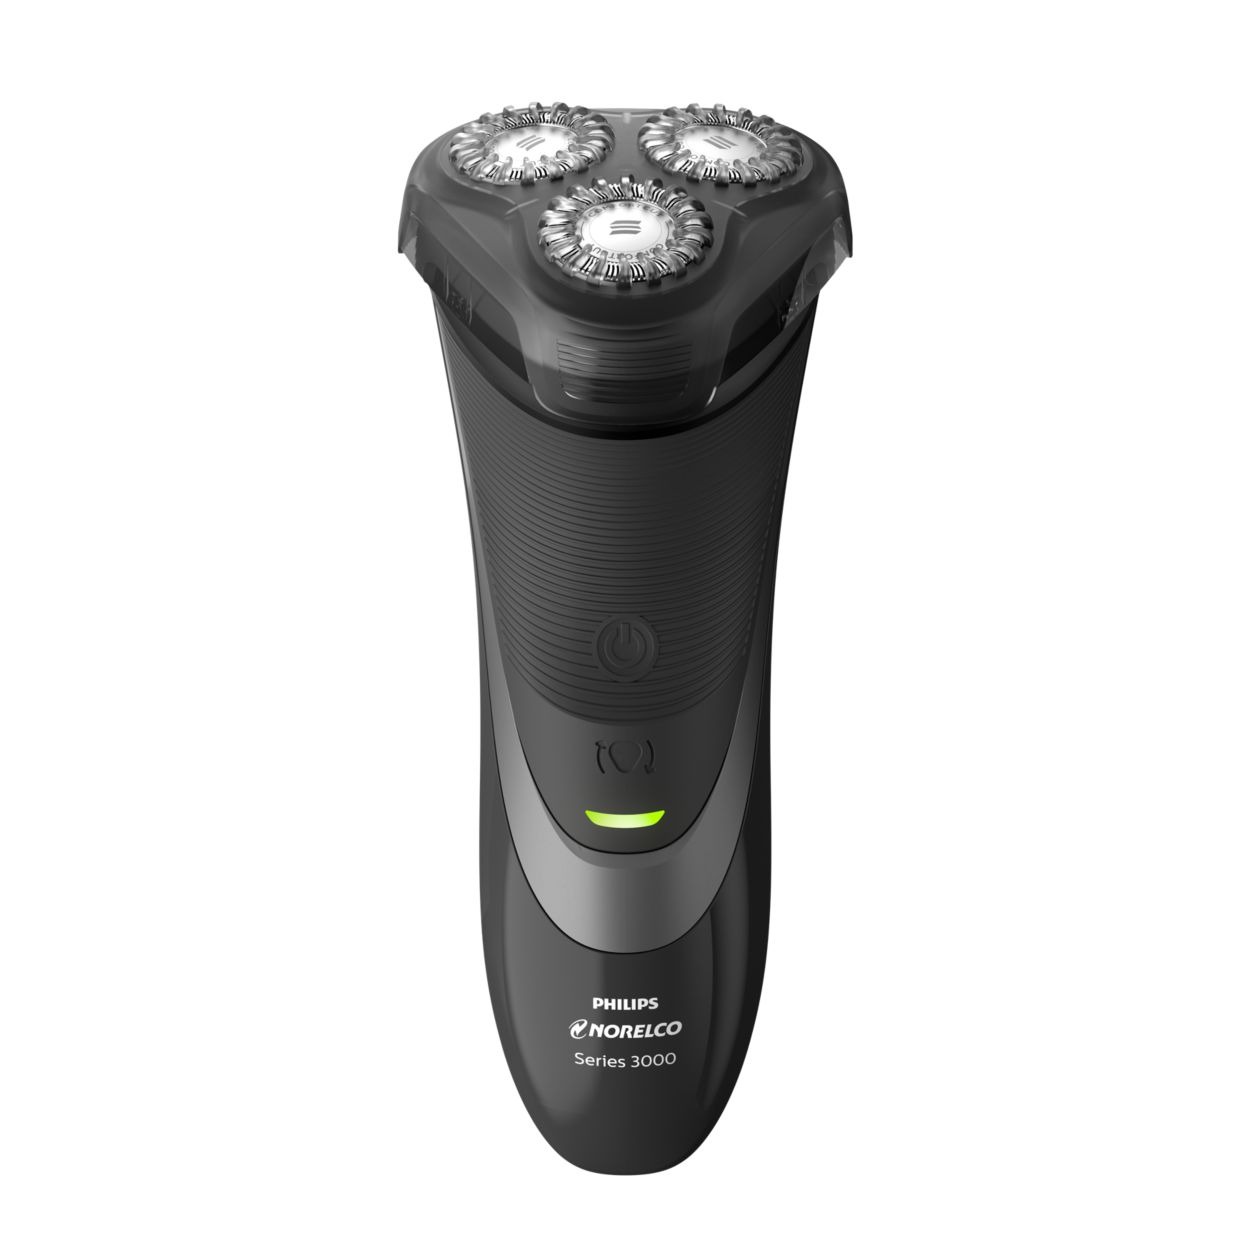 Best Buy: Philips Norelco Series 3000 Wet/Dry Electric Shaver Precision  Black/Black Metallic Chrome S3560/88